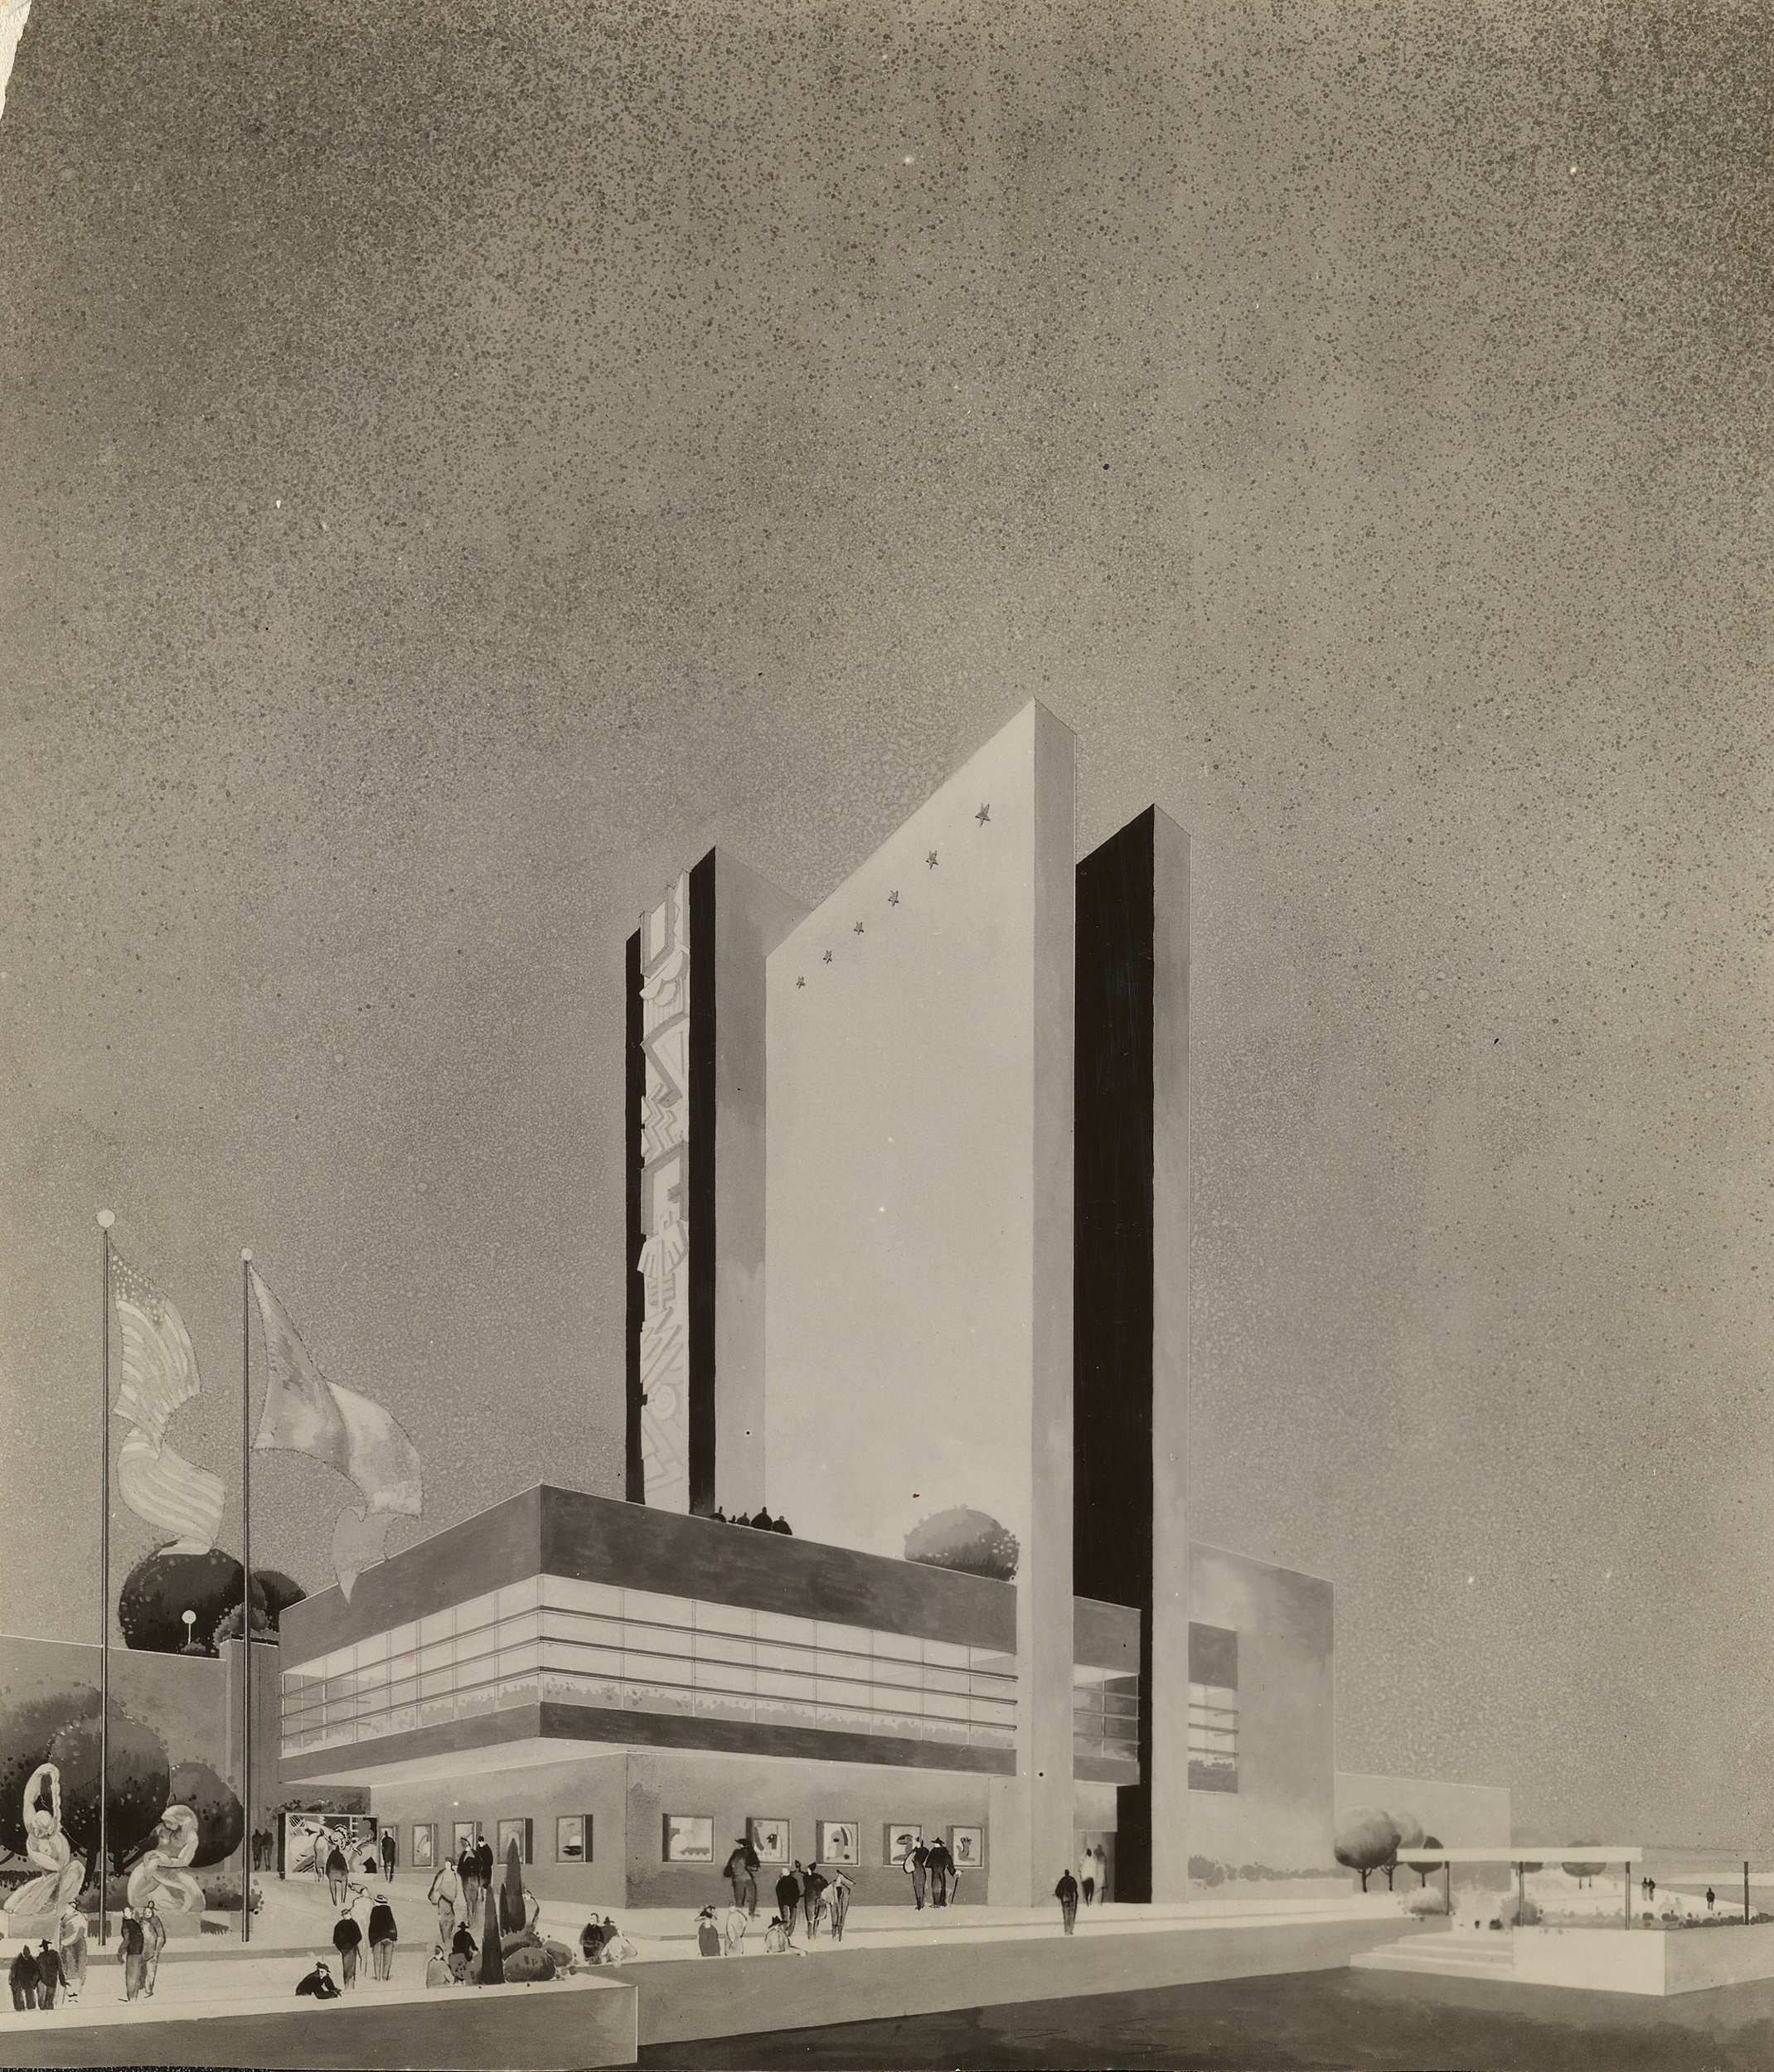 Black-and-white architectural rendering of a modernist building with two intersecting vertical elements, one of which is decorated with murals